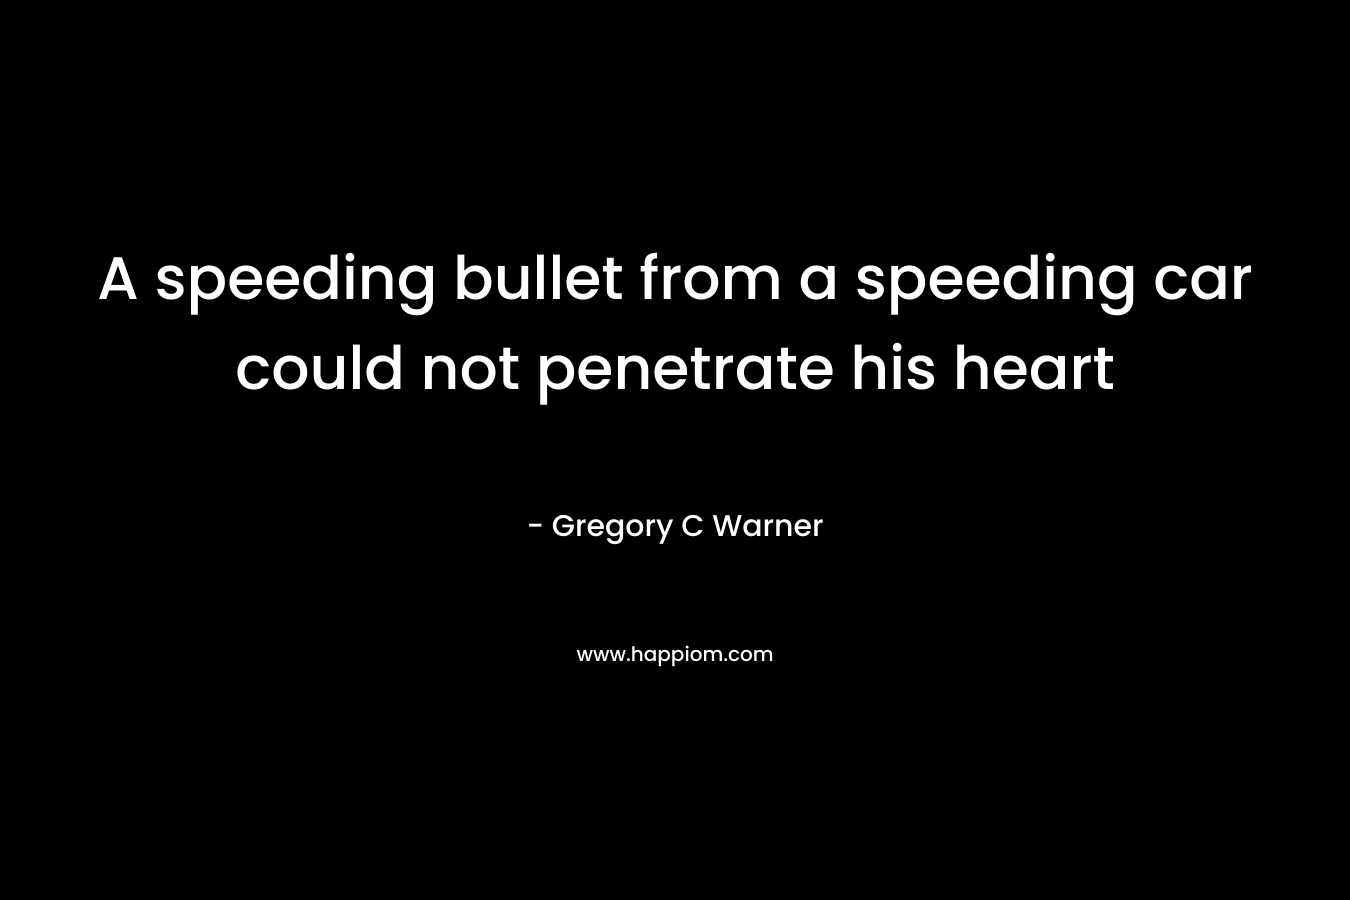 A speeding bullet from a speeding car could not penetrate his heart – Gregory C Warner